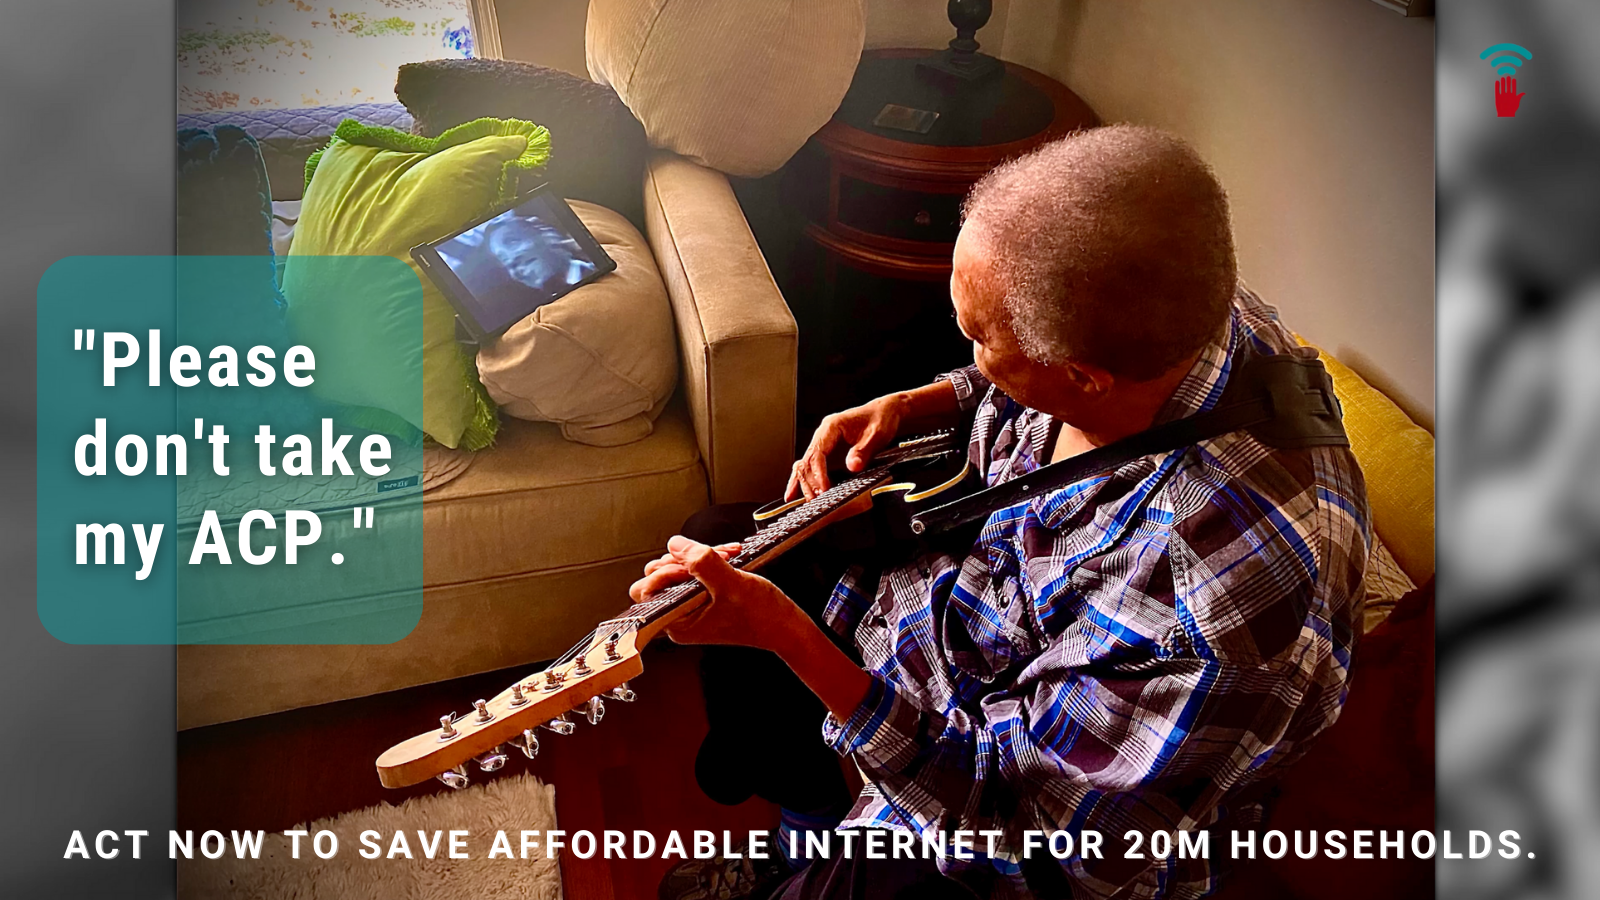 Photograph from above shows an older Black man holding a guitar while watching a tablet that's perched on the couch in front of him. Text reads: Please don't take my ACP.